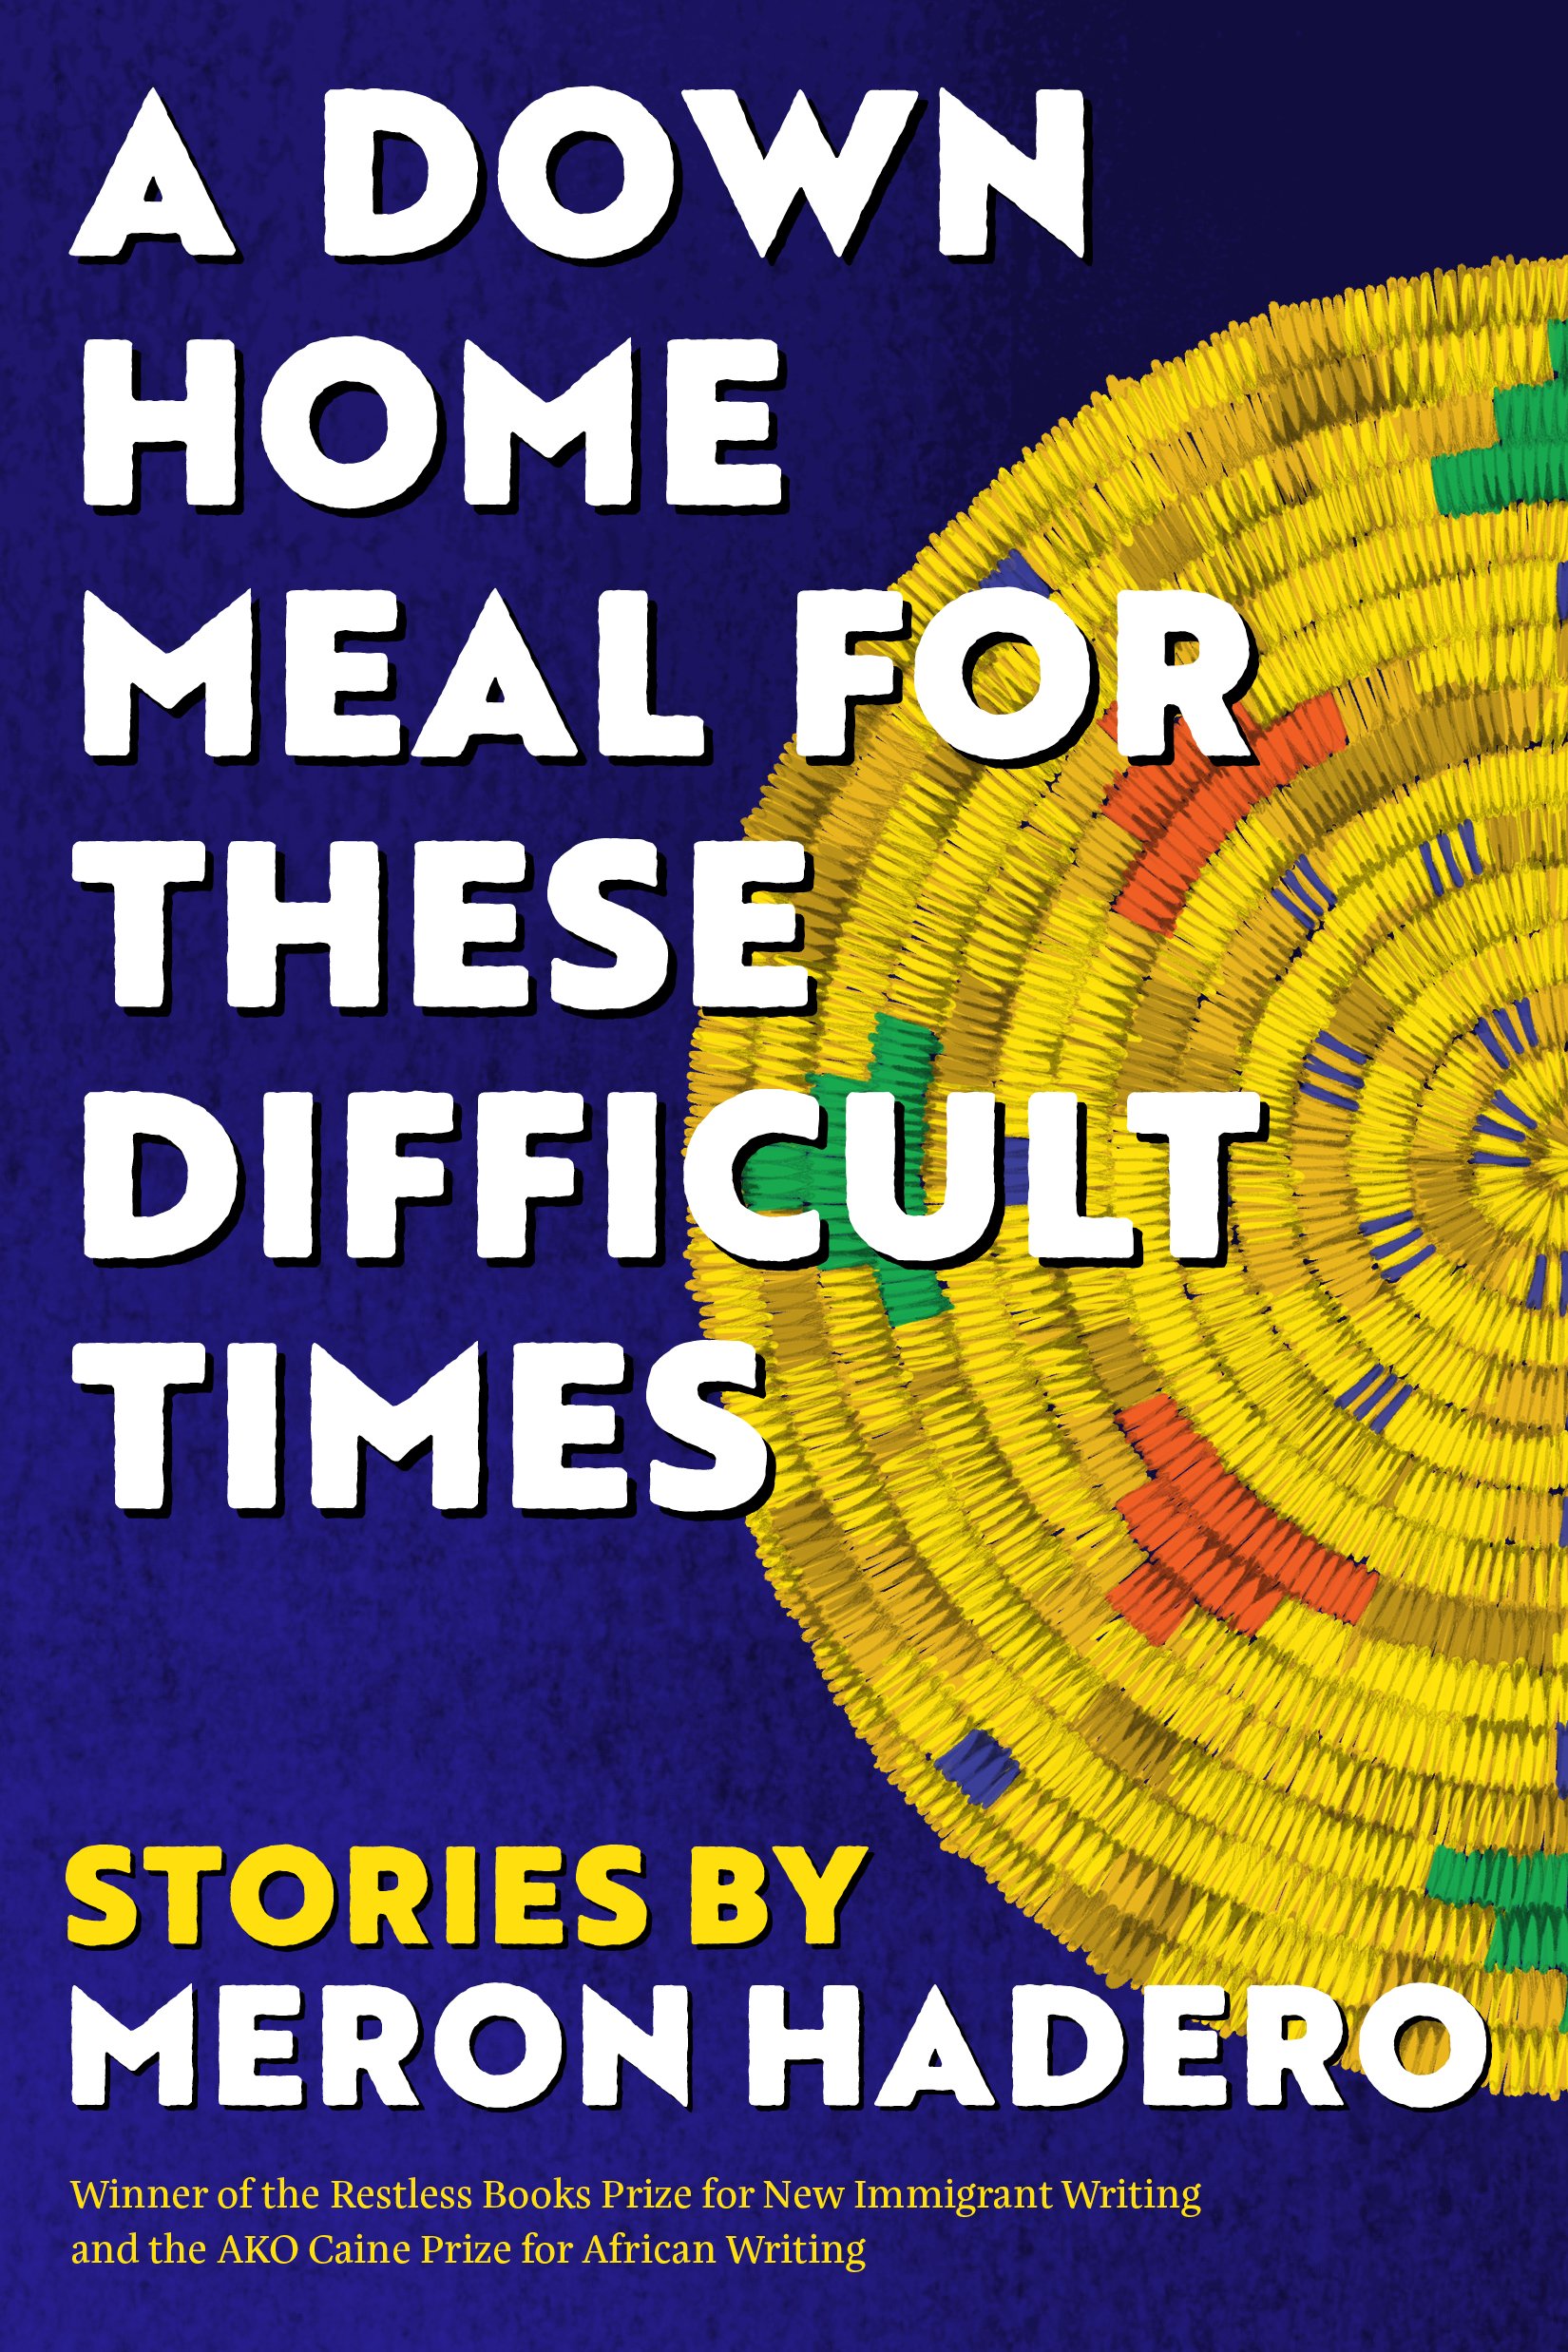 A Down Home Meal for These Difficult Times — Restless Books pic